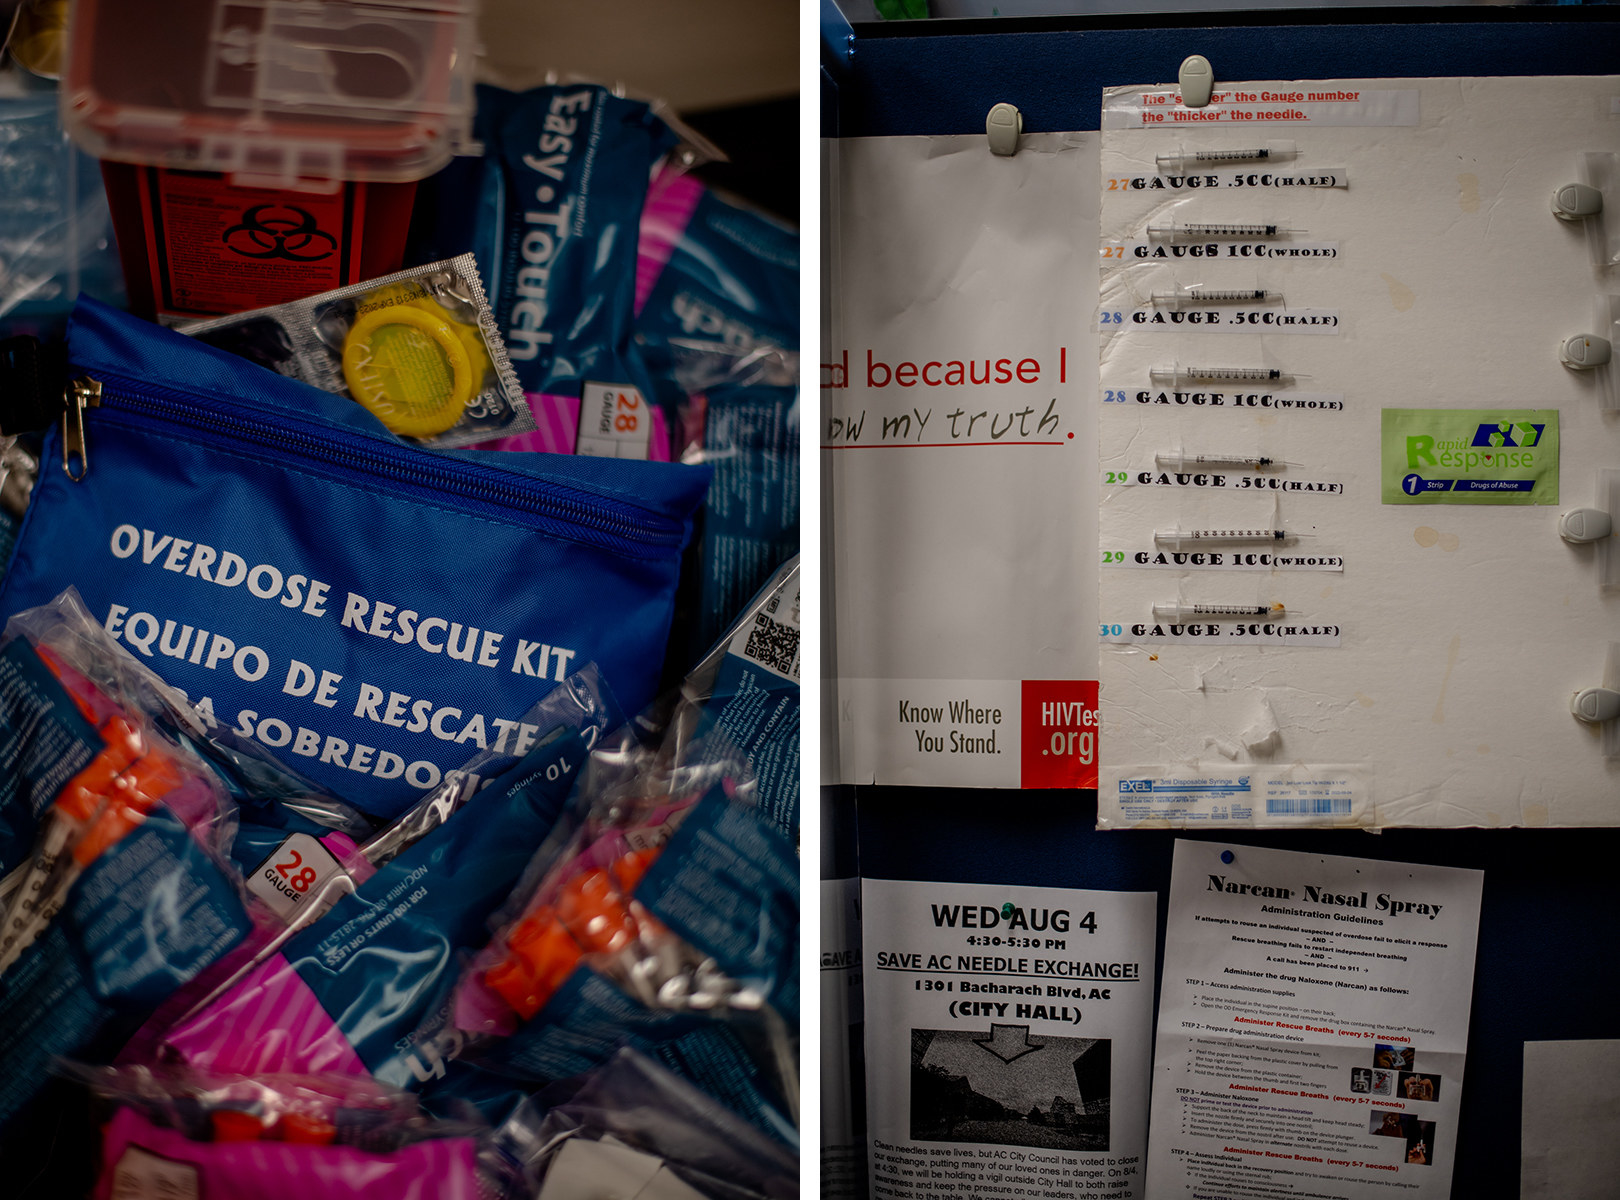 Left, an overdose rescue kit and condoms. Right, a poster with needles and a sign